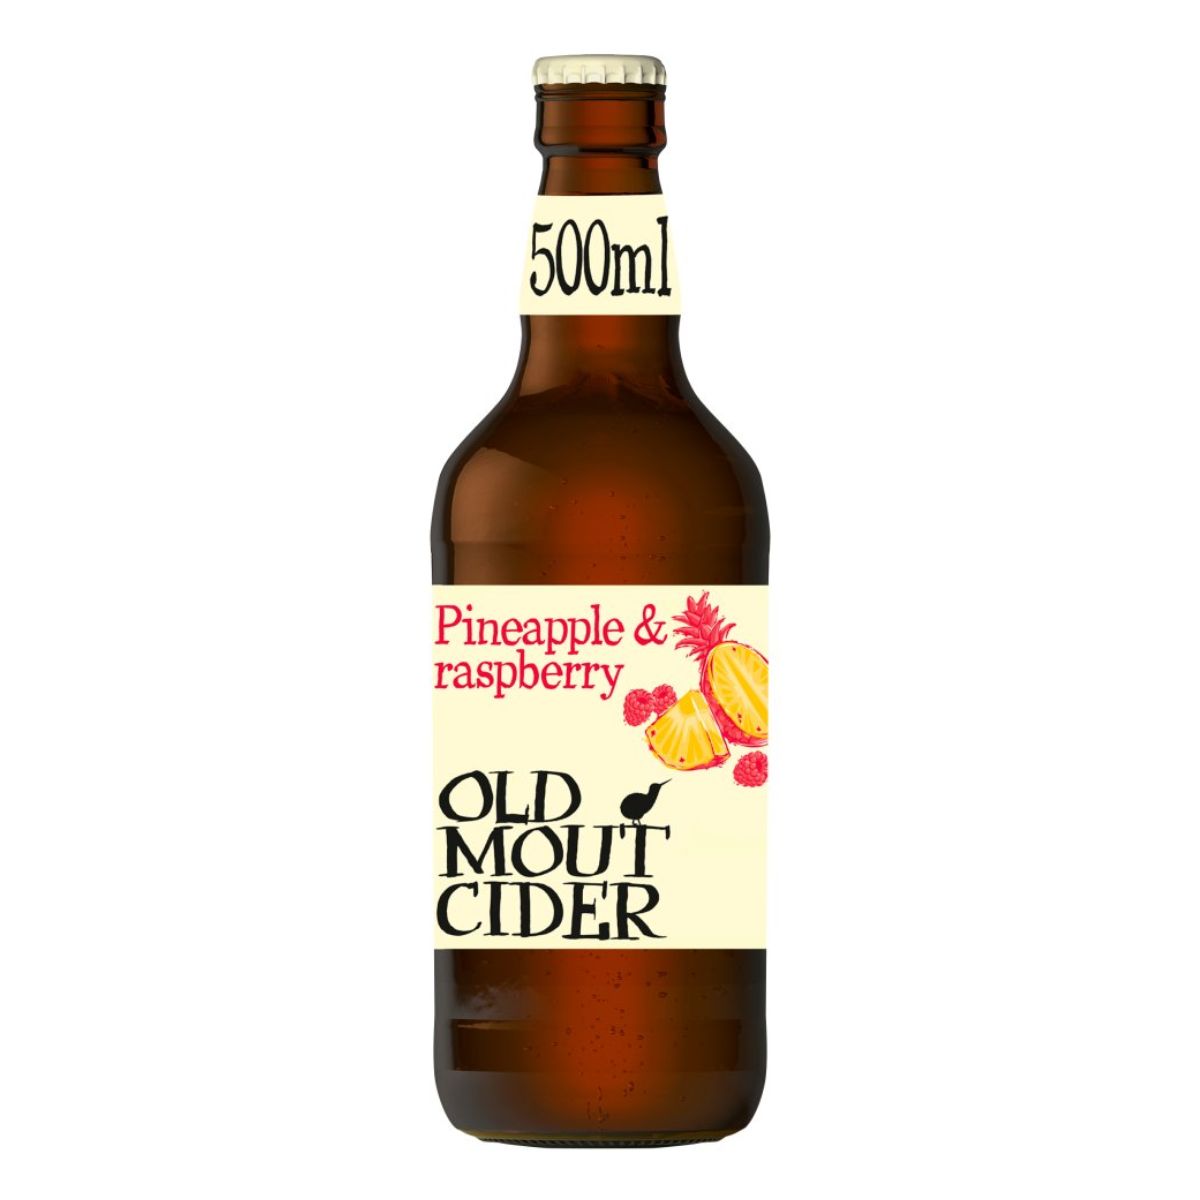 Old Mout Cider - Pineapple & Raspberry Bottle (4.0% ABV) - 500ml